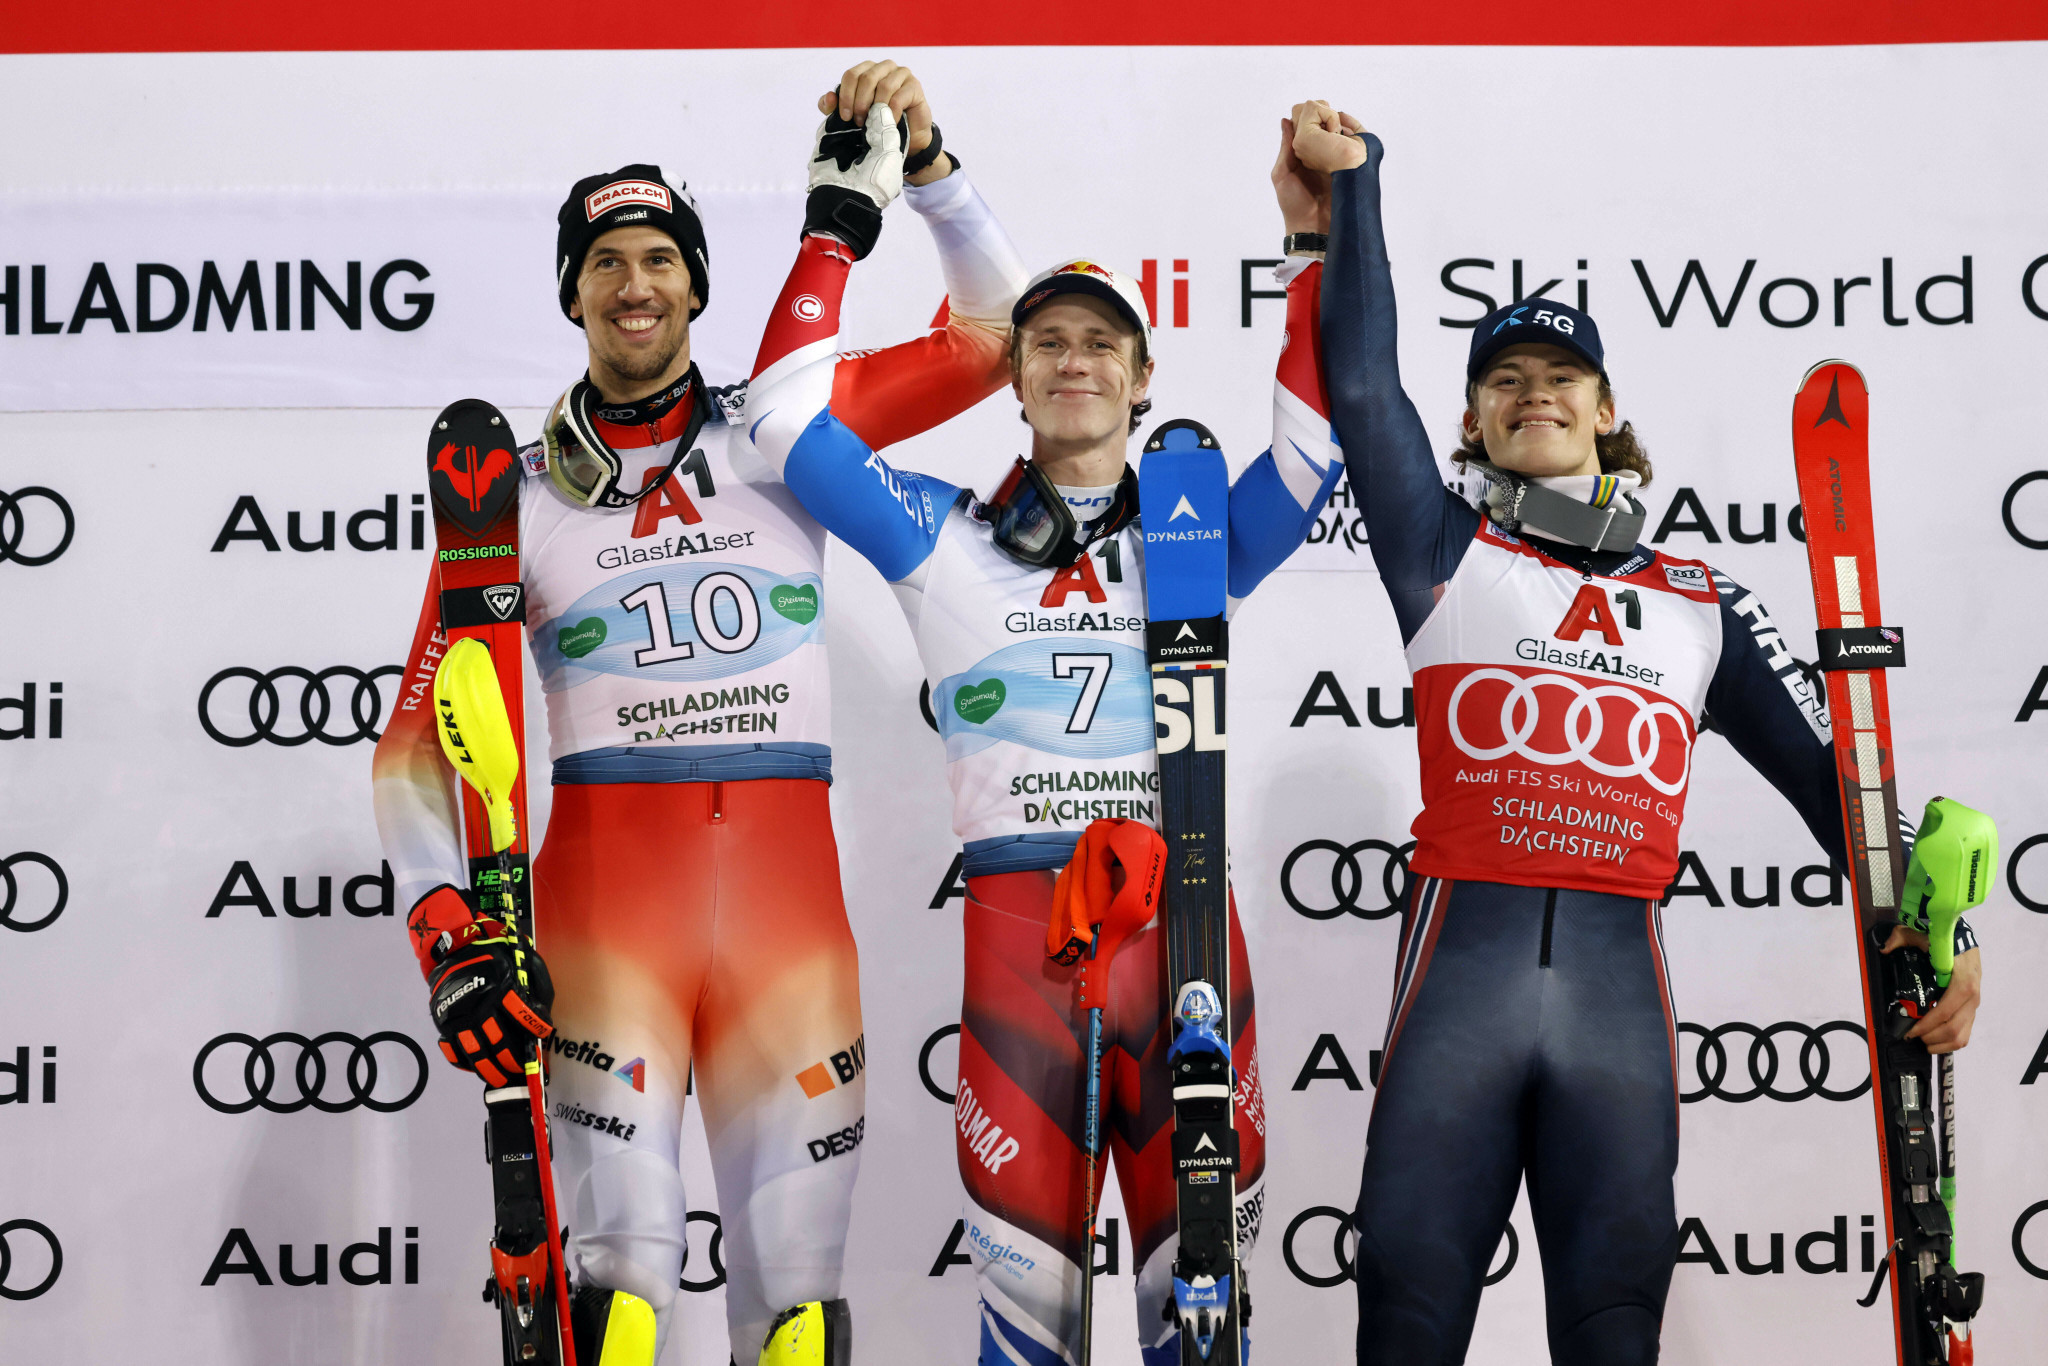 The podium for the slalom race at the Alpine Skiing World Cup in Schladming ©Getty Images